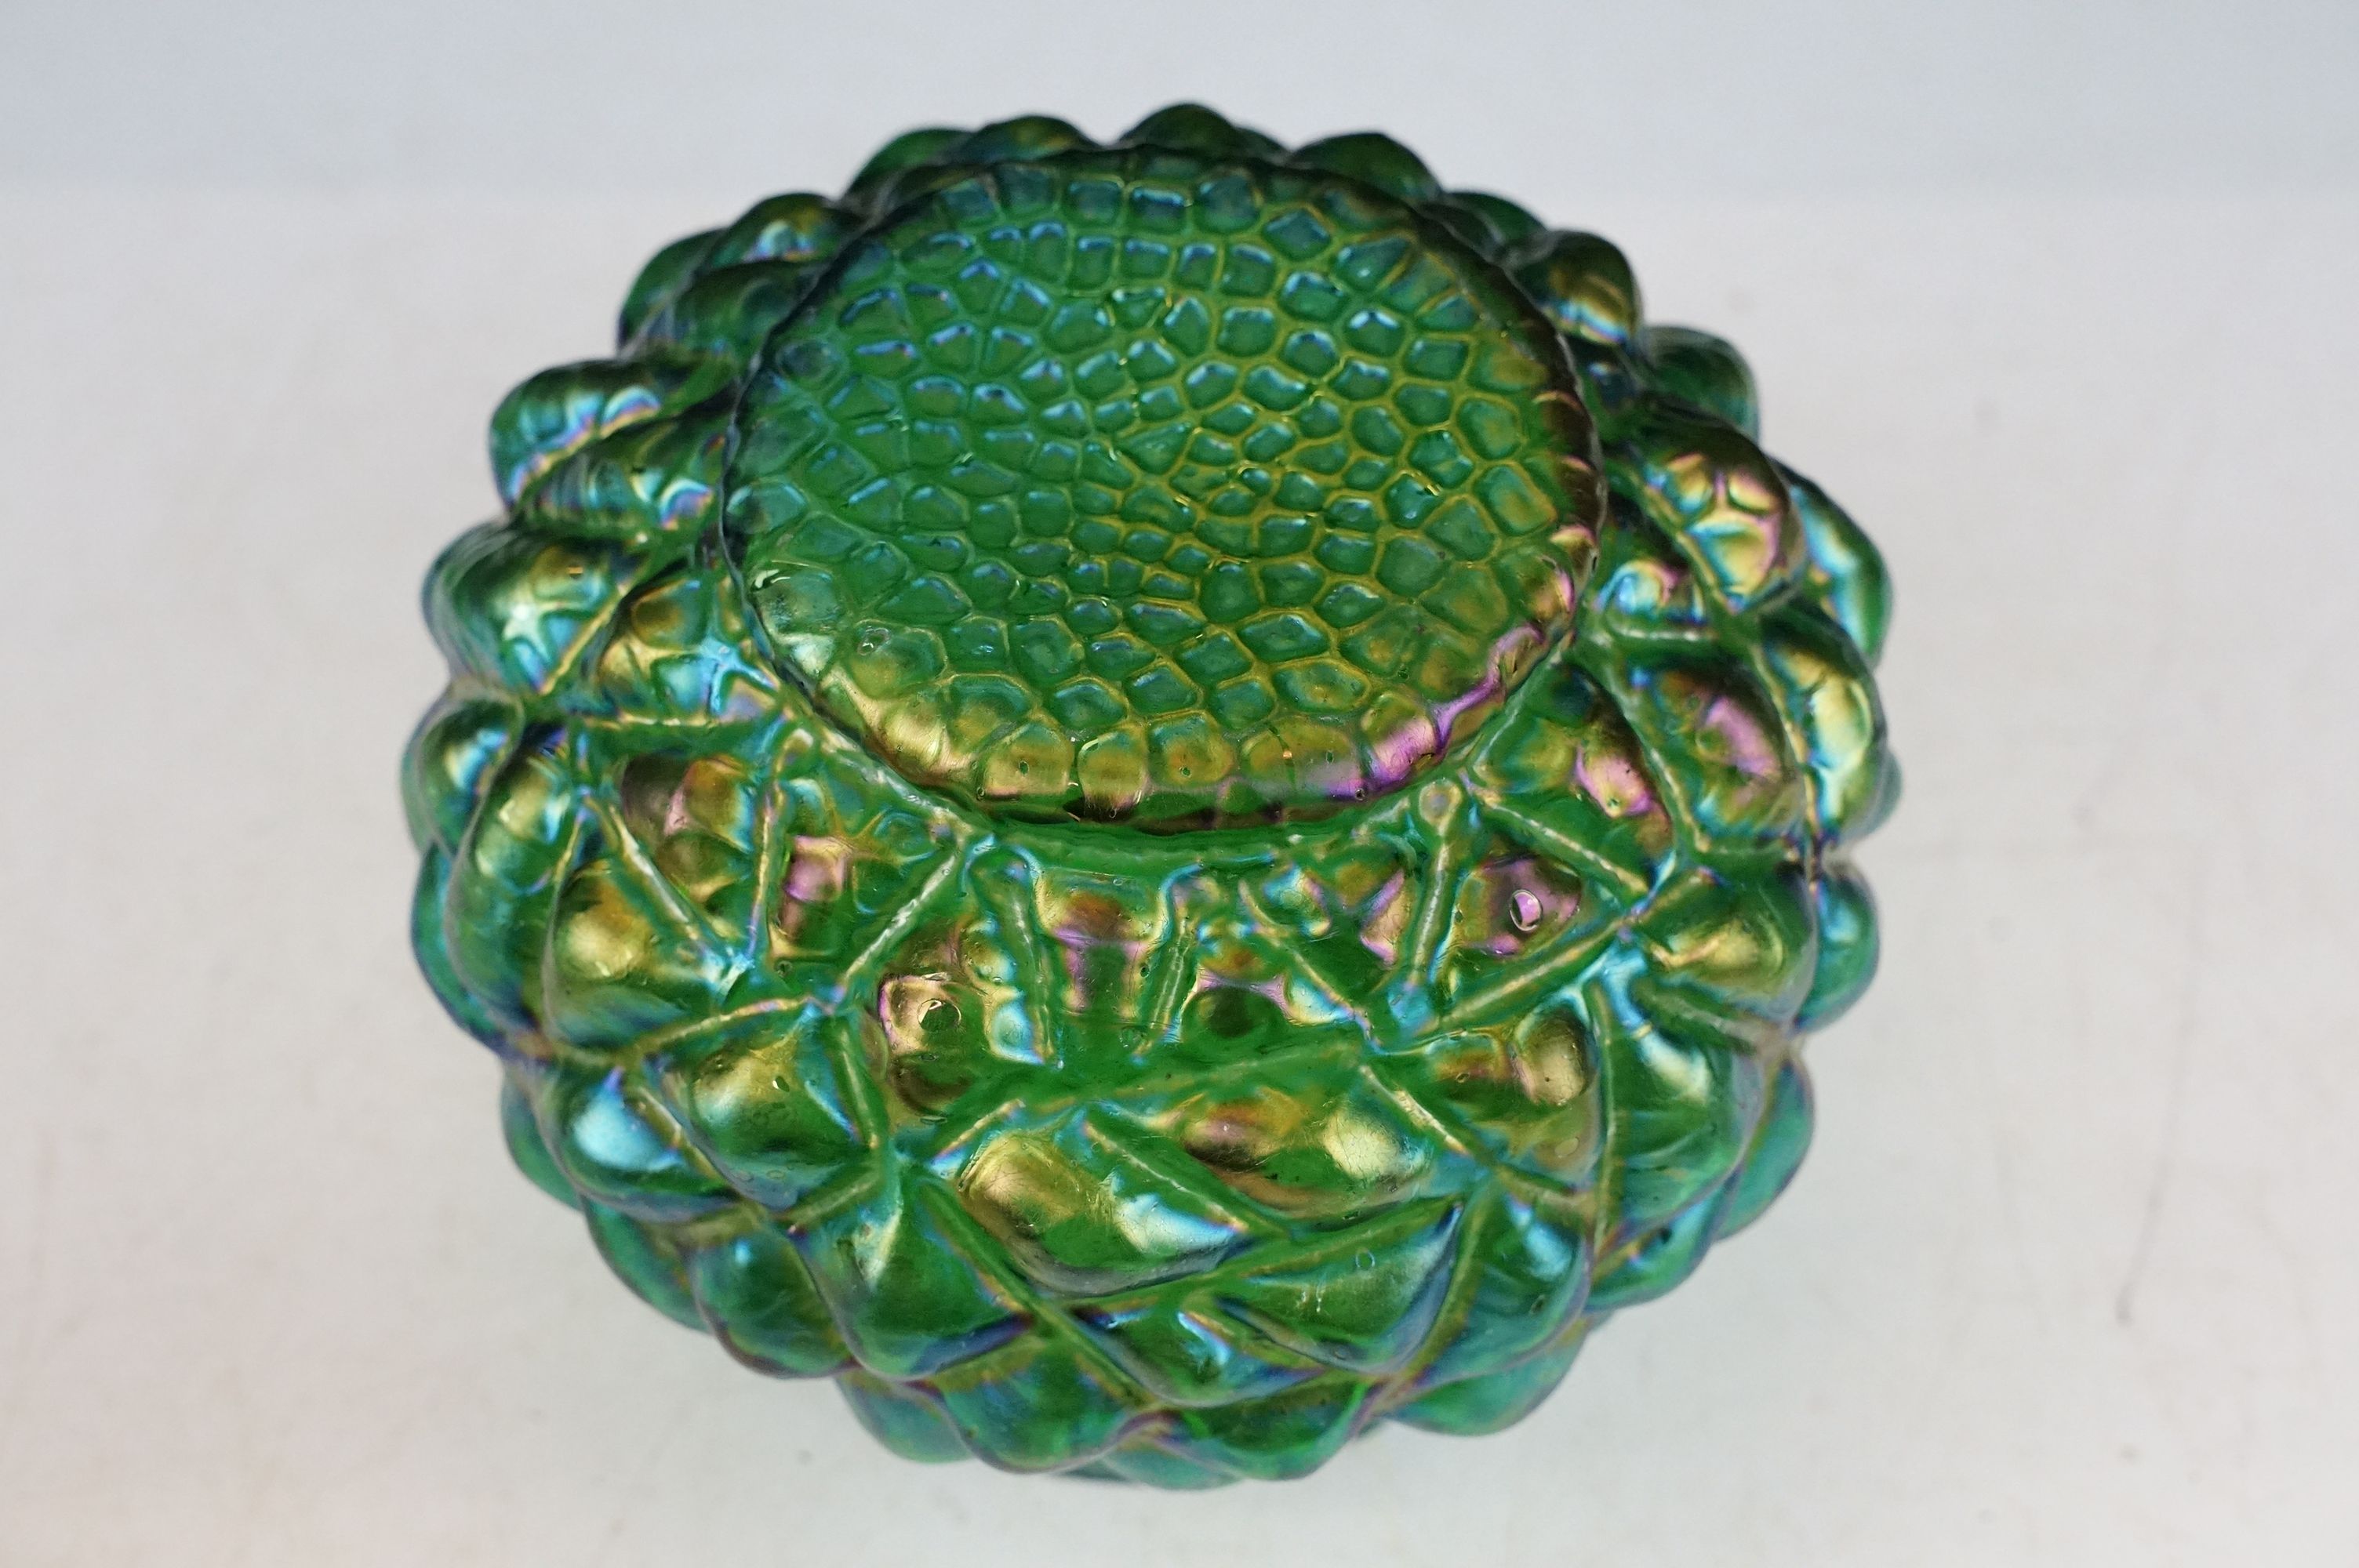 Two early 20th century Kralik iridescent glass rose bowls to include a green glass textured - Image 14 of 14